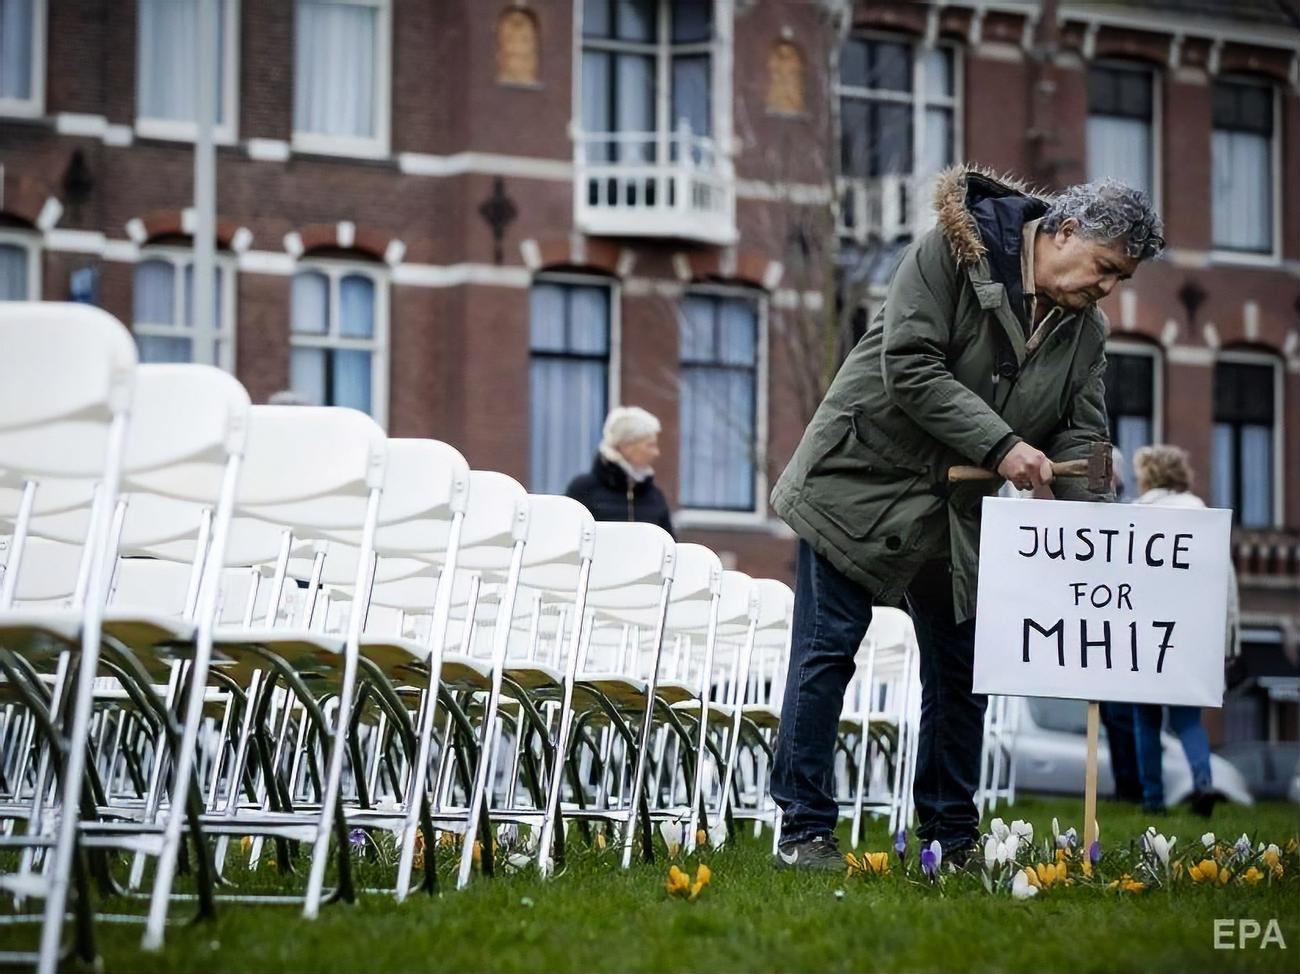 The guilty are not punished, today the World remembers flight MH17 tragedy’s victims, Defense Express